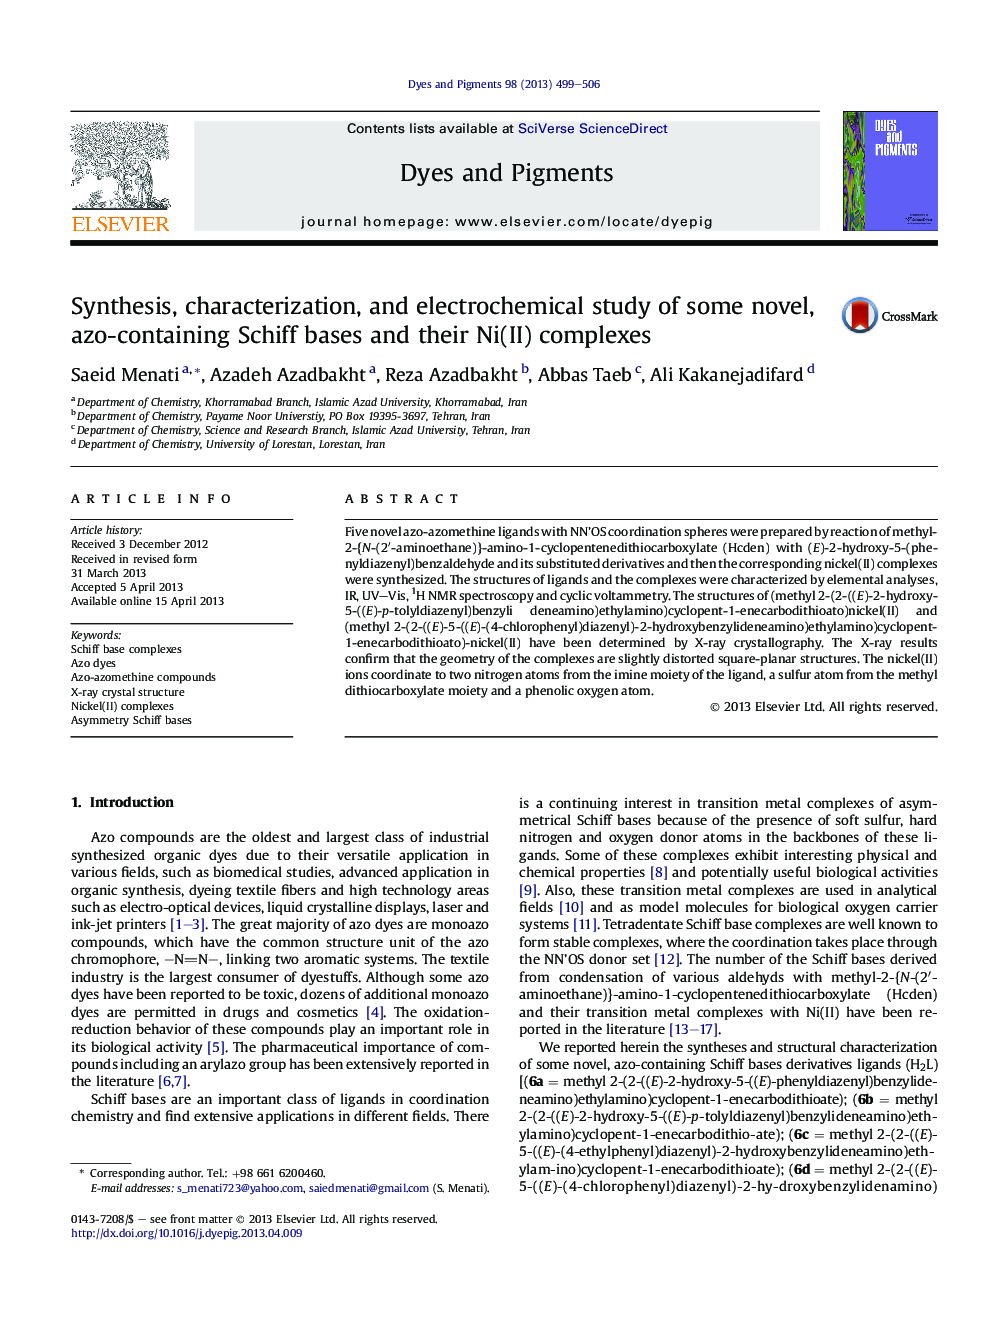 Synthesis, characterization, and electrochemical study of some novel, azo-containing Schiff bases and their Ni(II) complexes